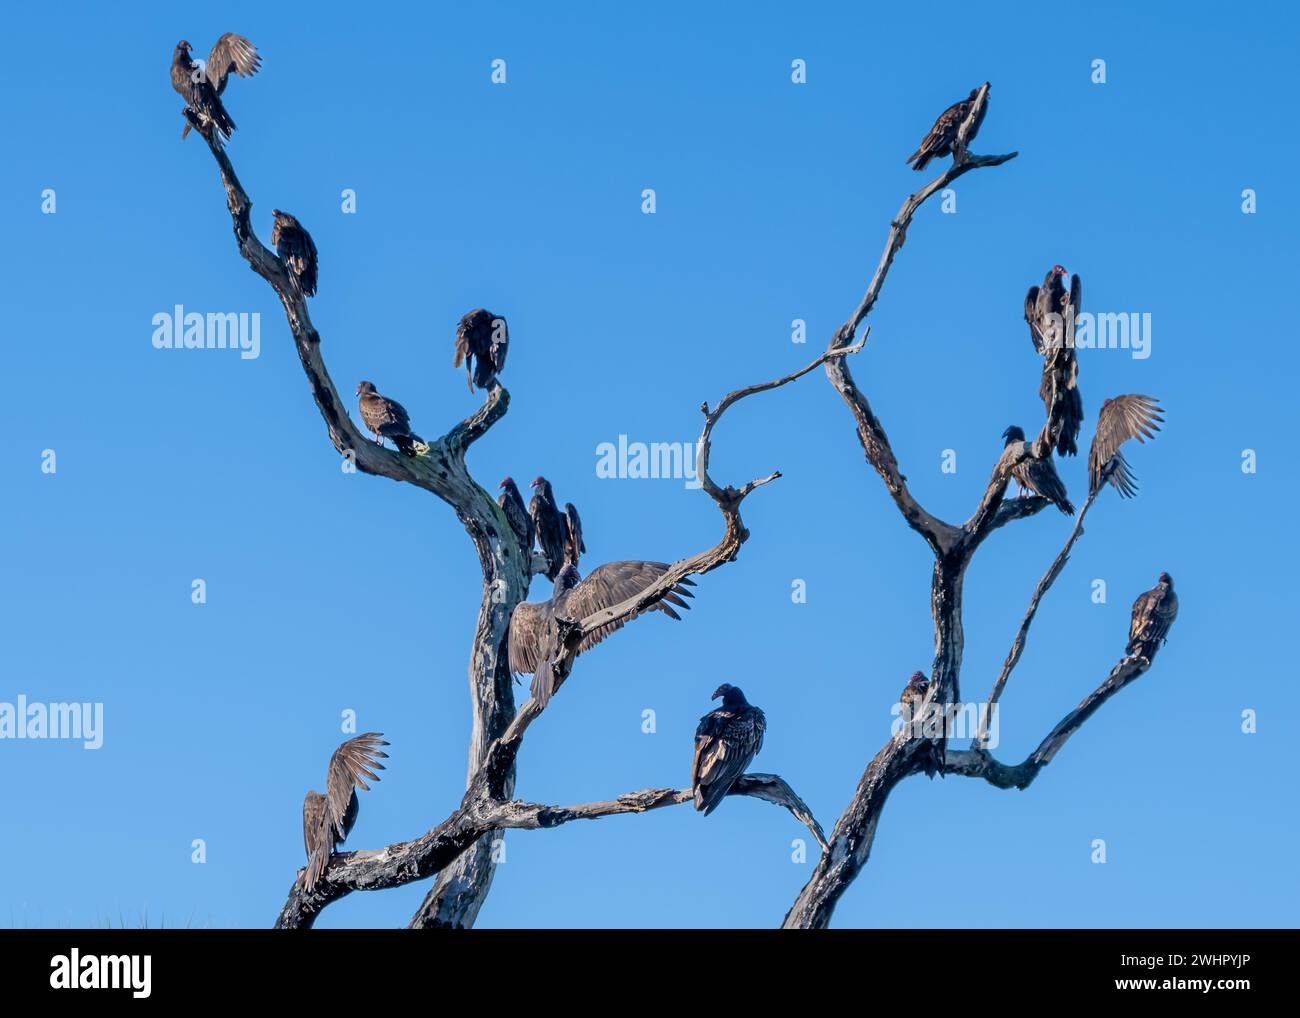 Turkey vultures perched in a tree, Deep Hole Trail, Myakka River State Park, Florida Stock Photo